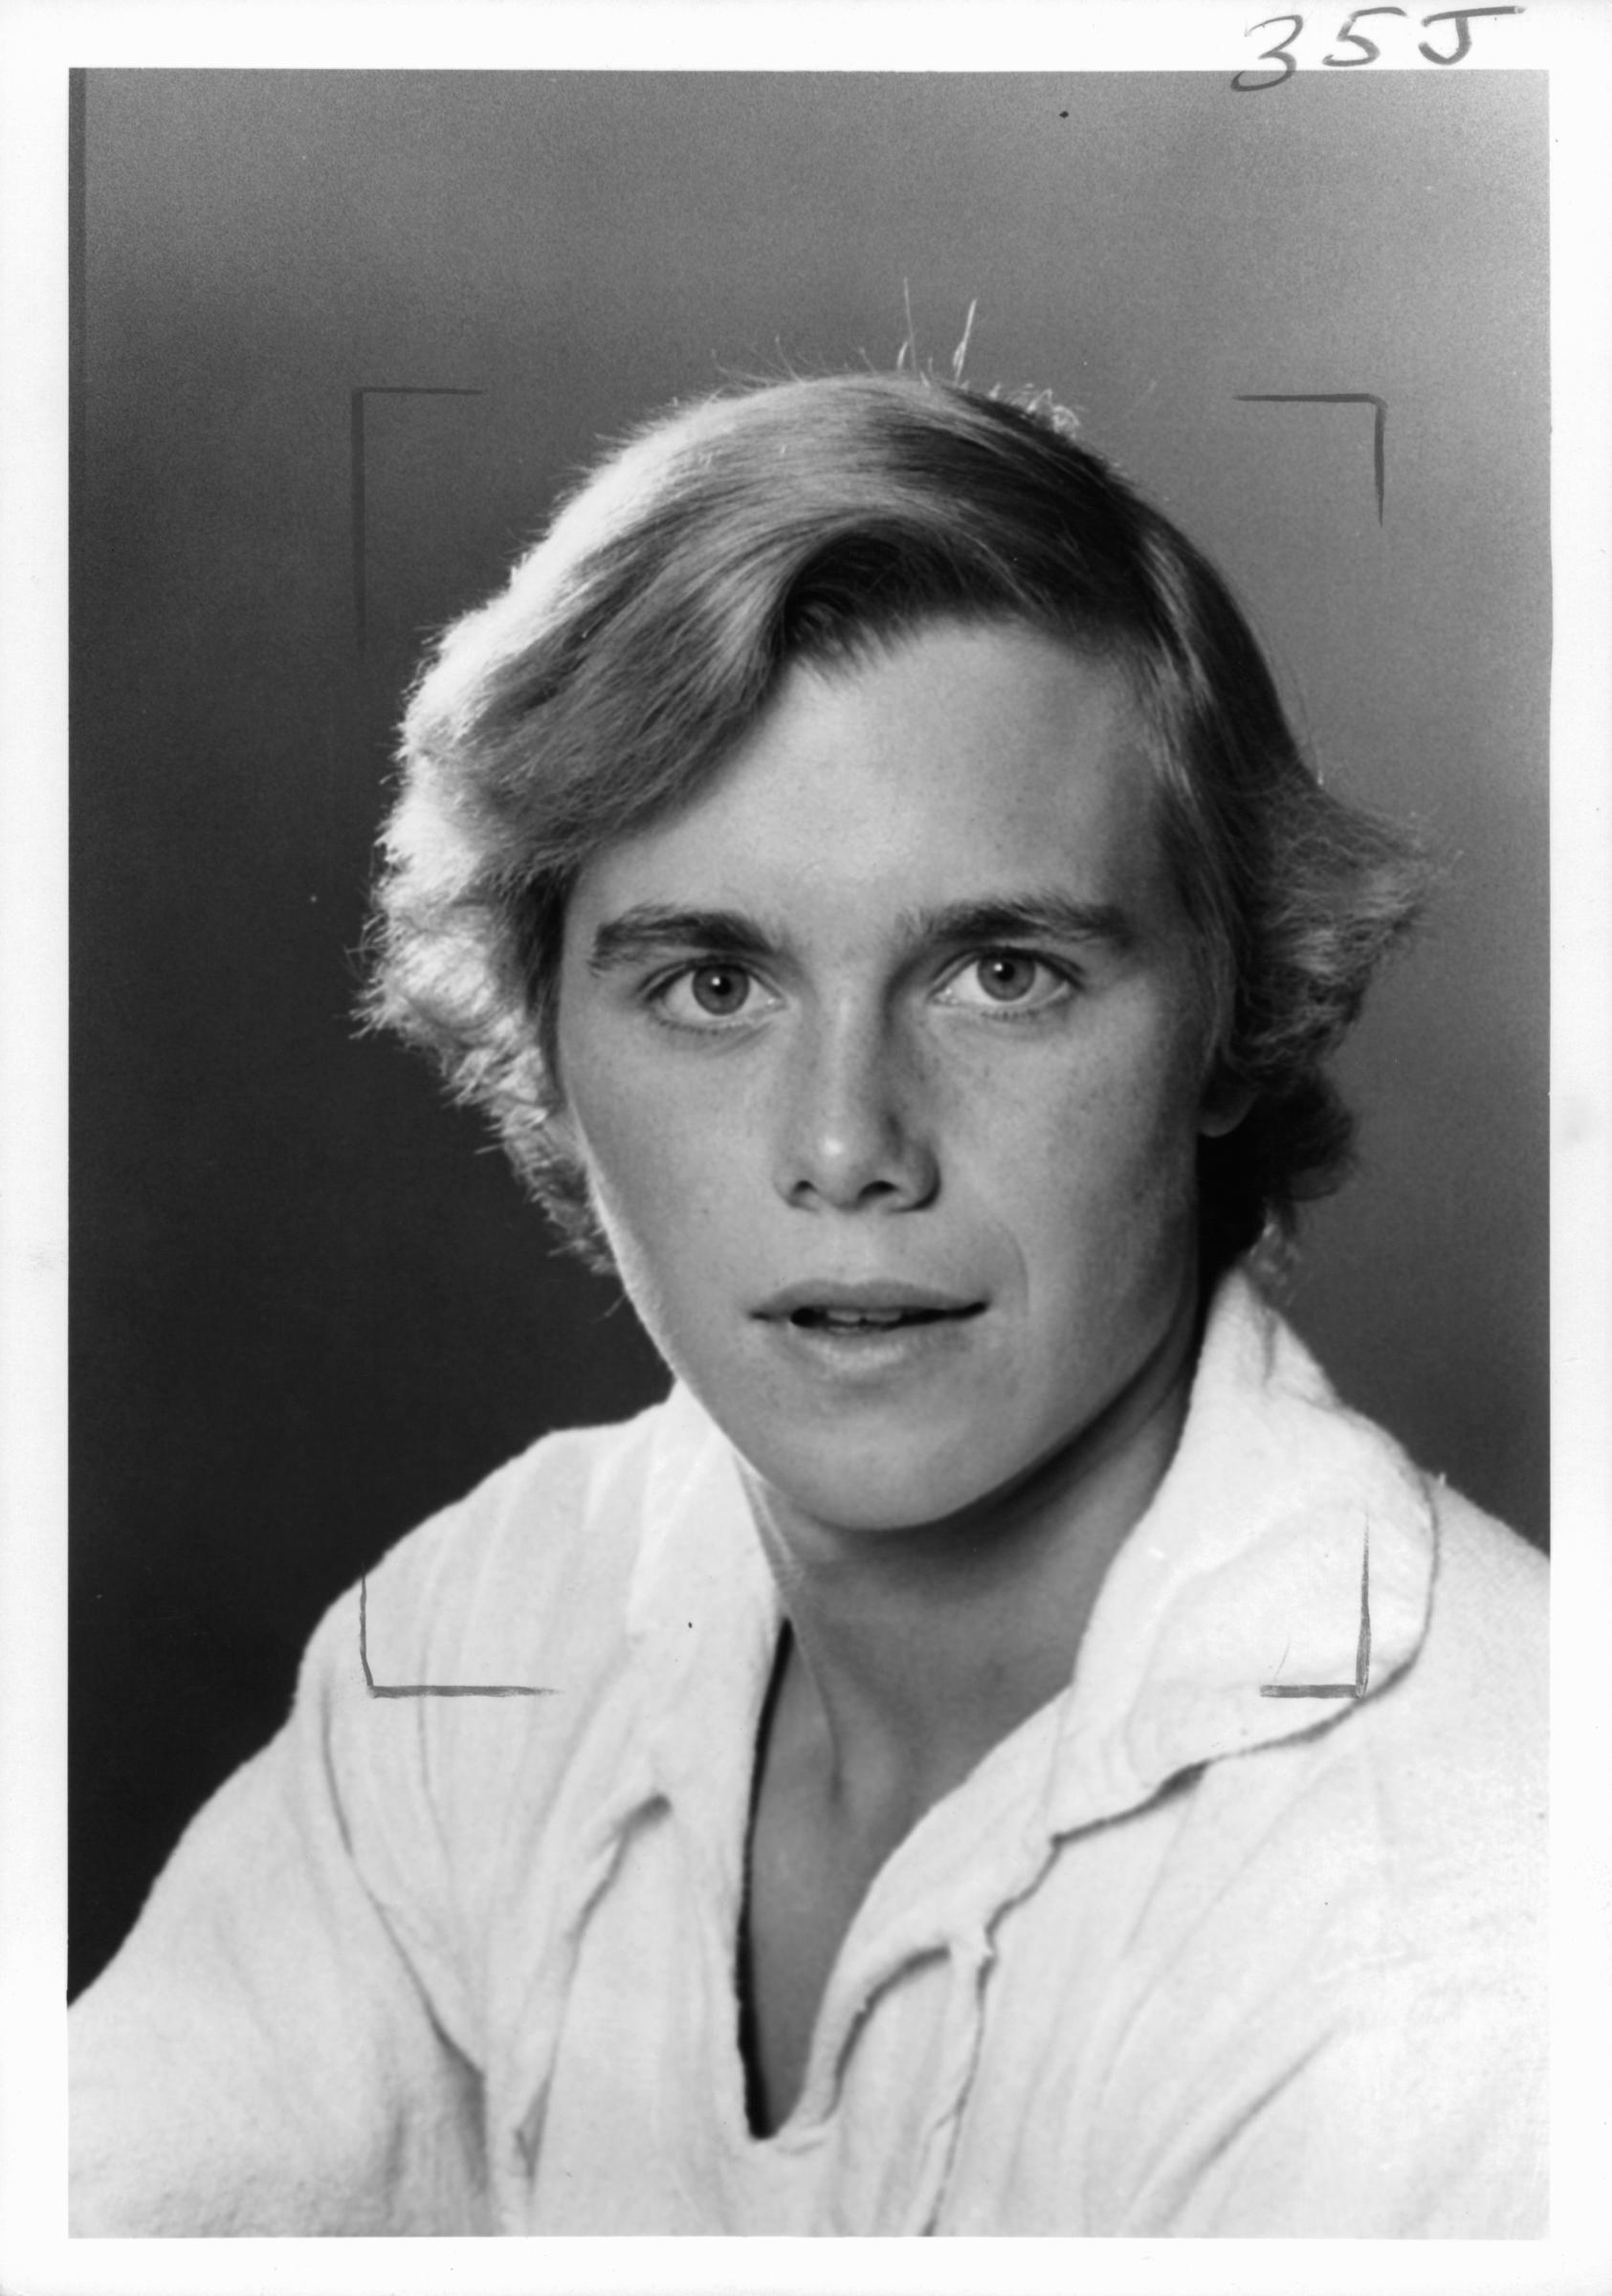 Christopher Atkins, circa 1980. | Source: Getty Images